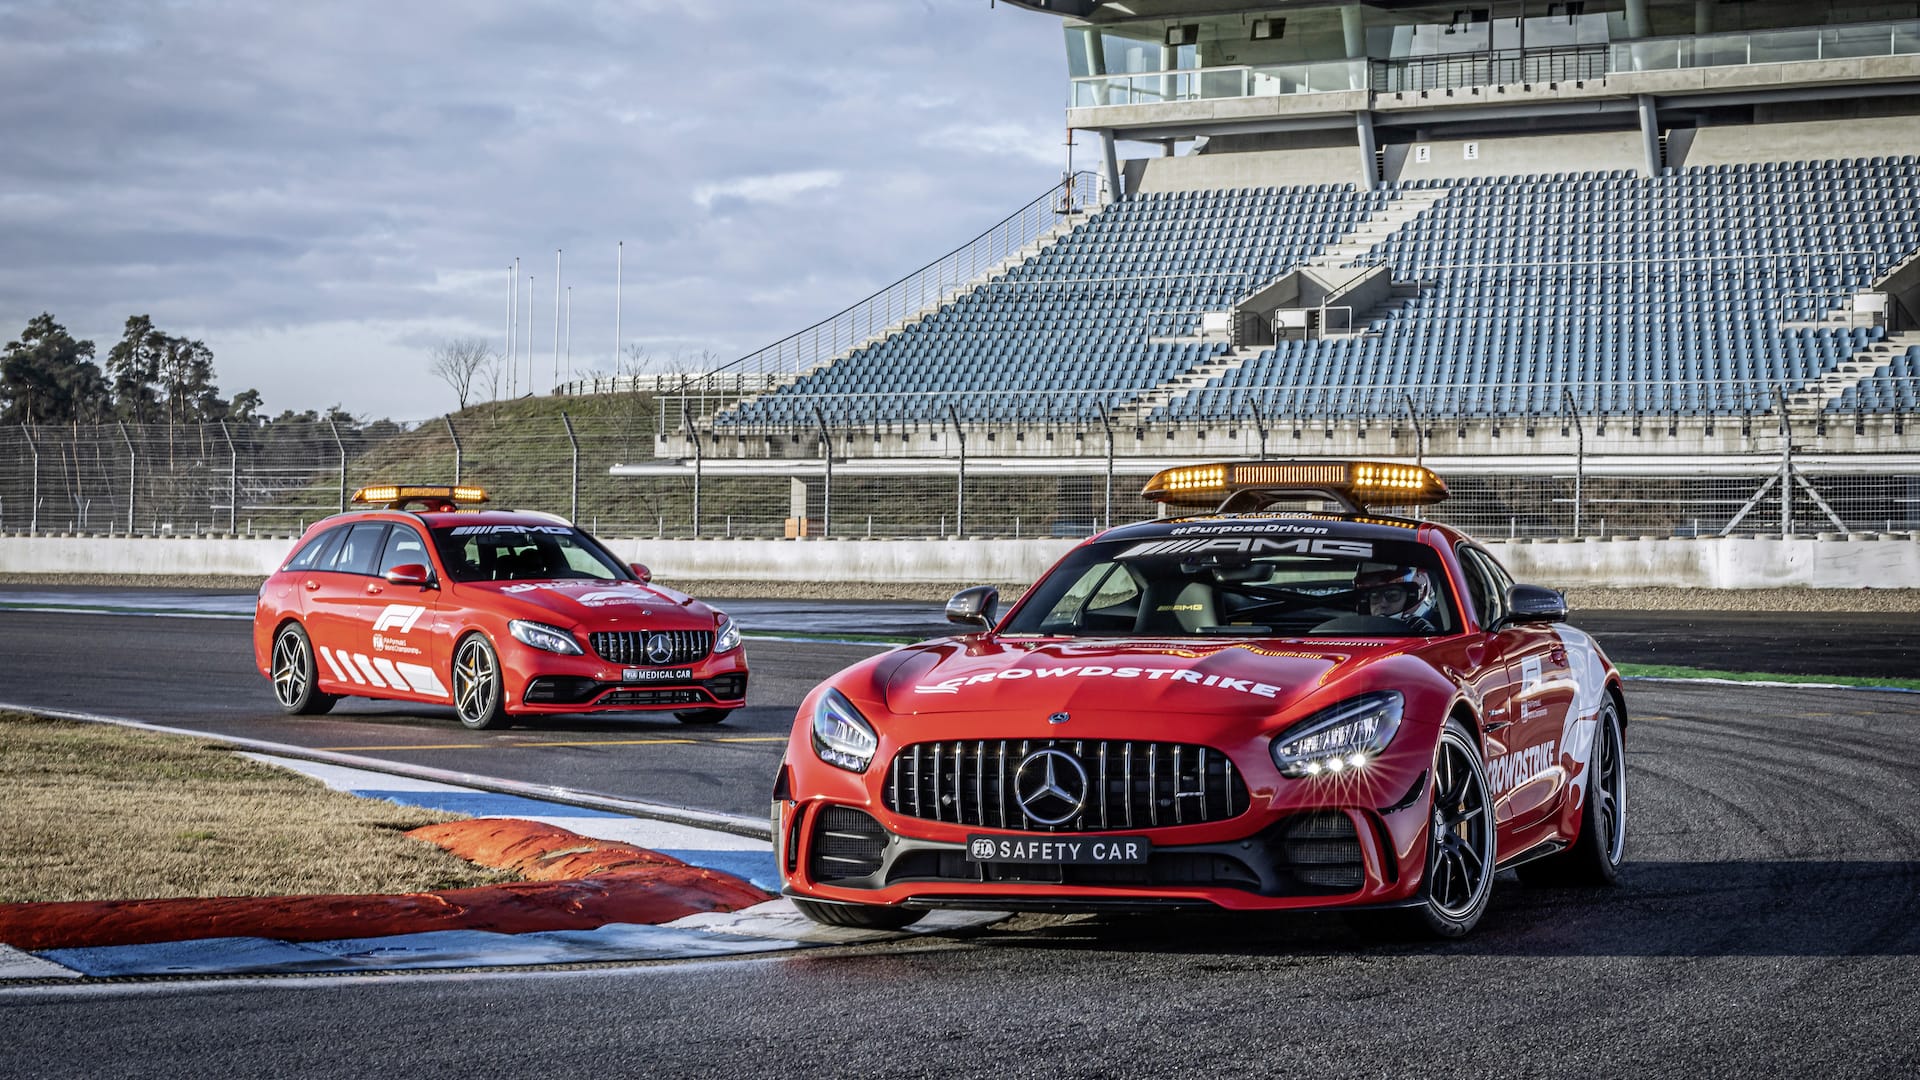 An almost guaranteed Mercedes-Benz leader on track